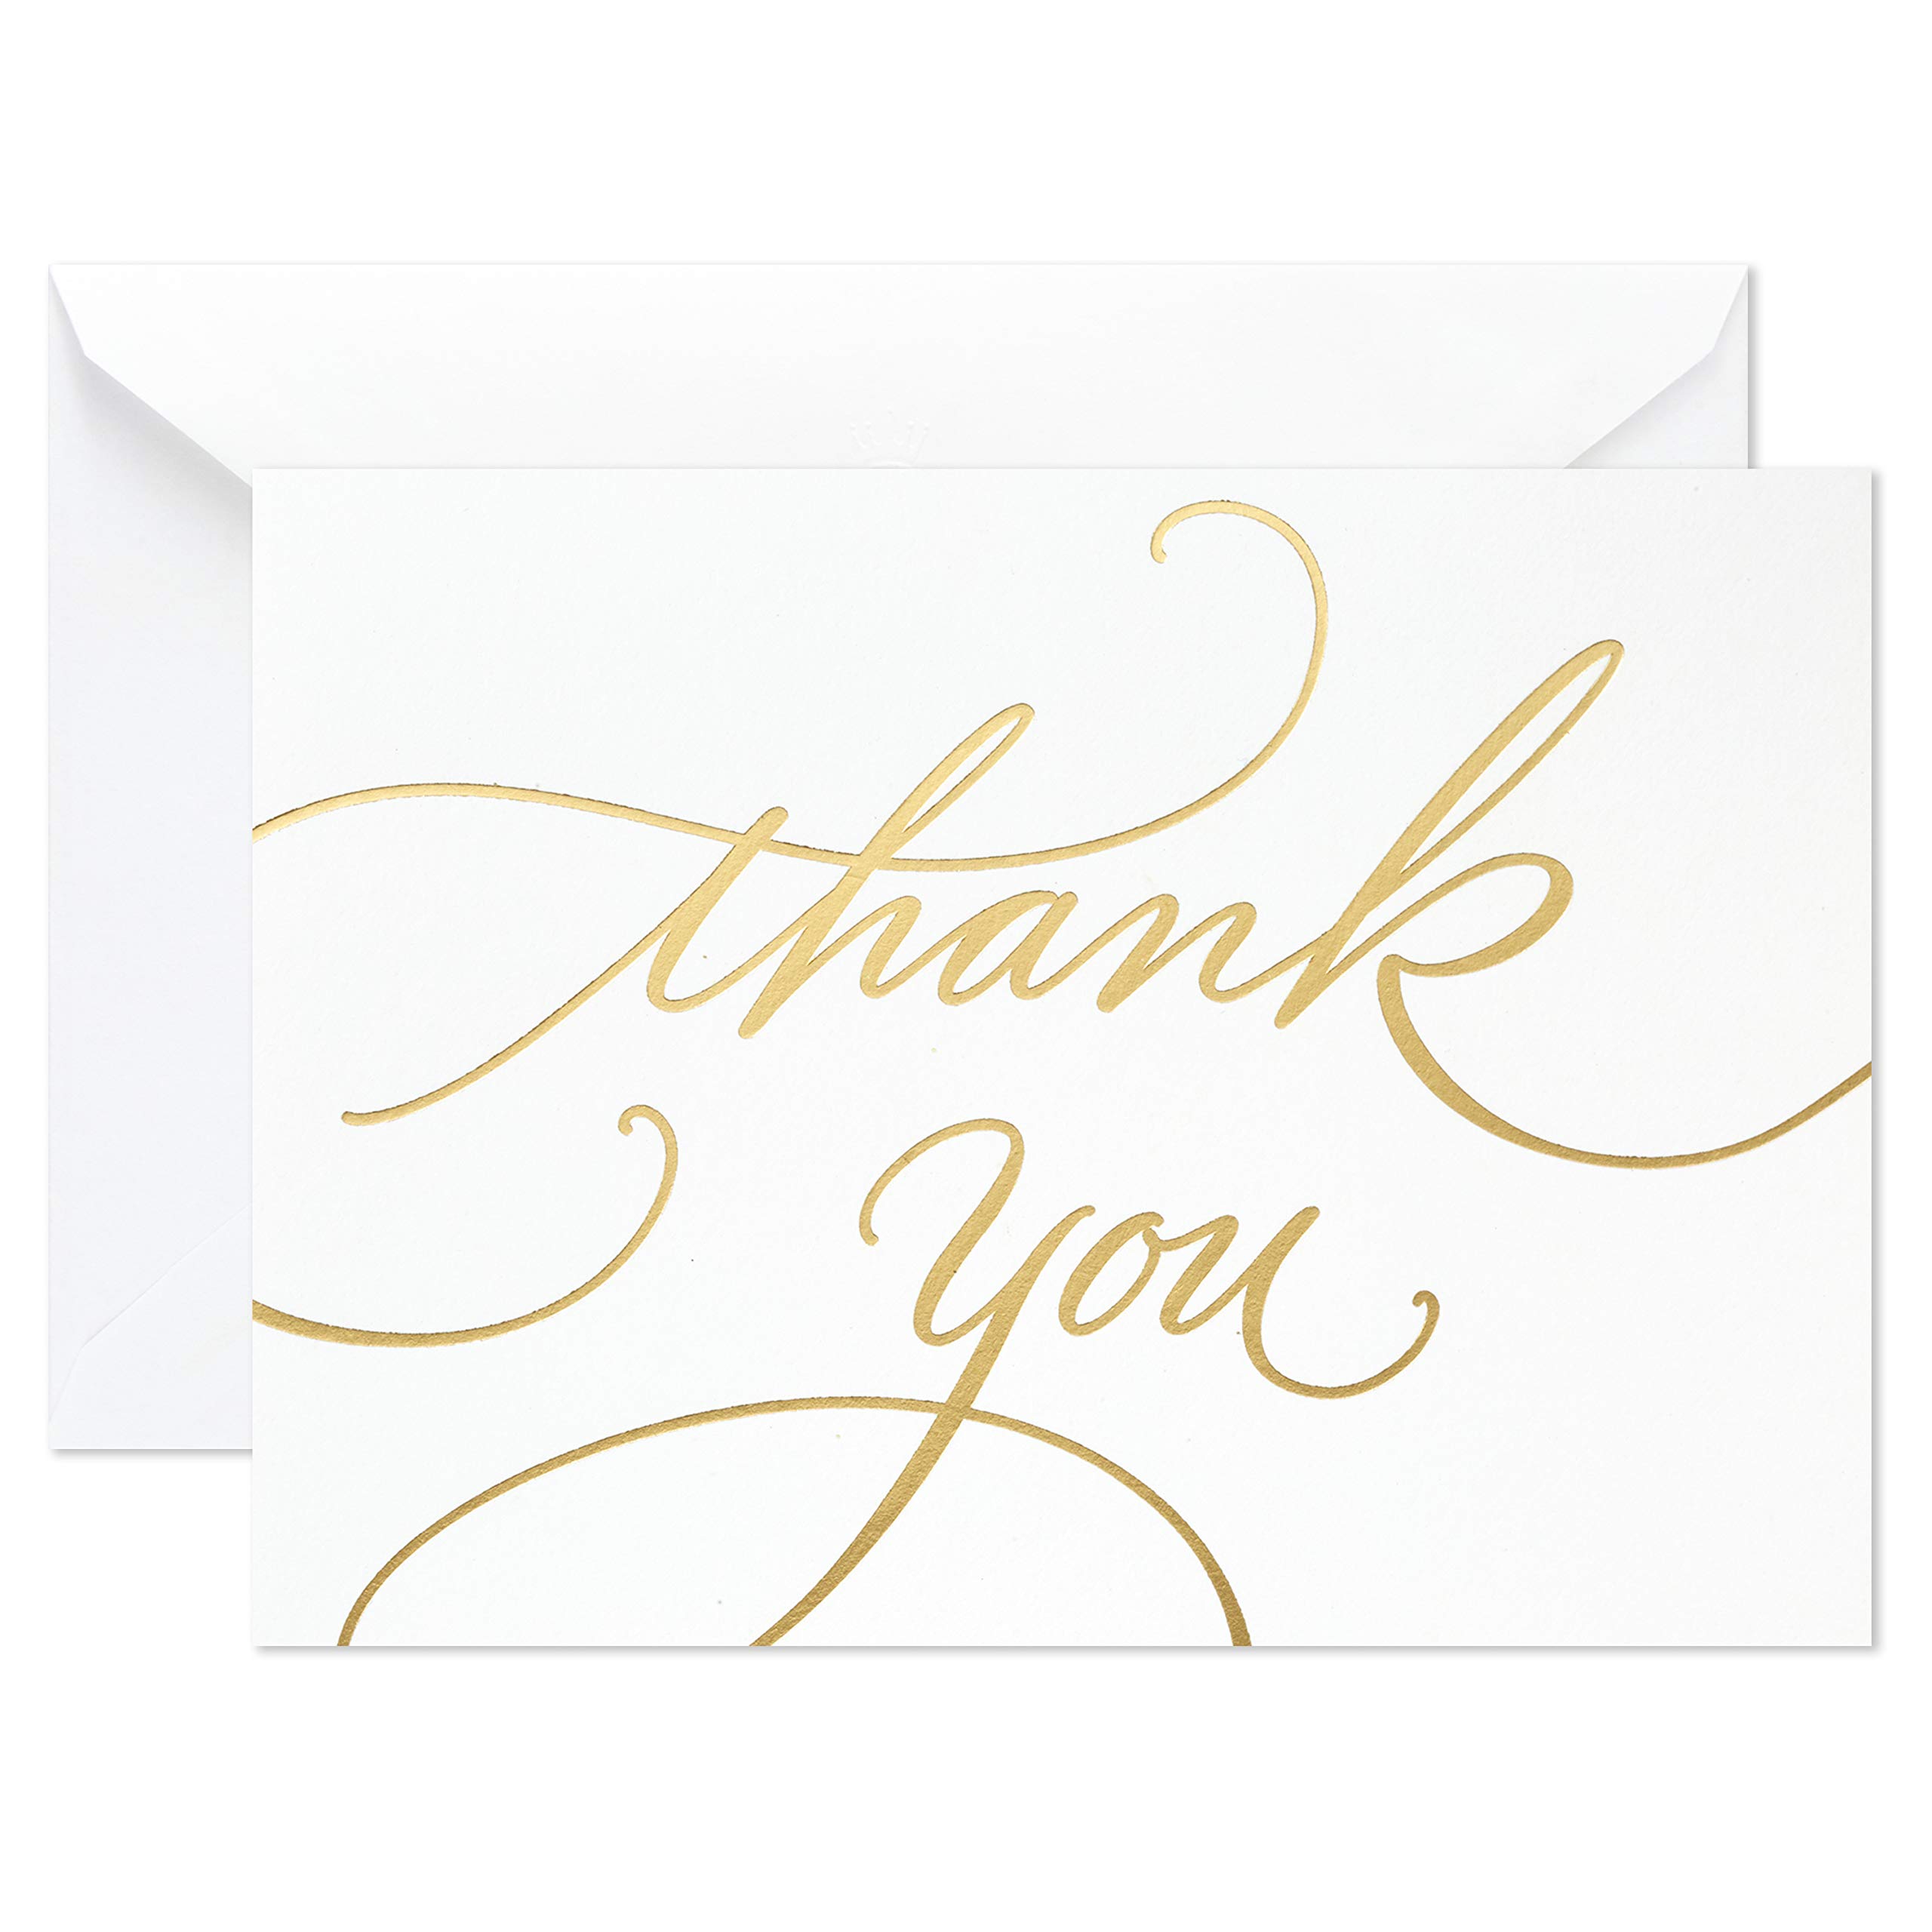 Hallmark Wedding, Baby Shower, Bridal Shower Thank You Cards (Gold Foil Script & Thank You Cards Assortment, Painted Florals (48 Cards with Envelopes for Baby Showers, Bridal Showers, Weddings